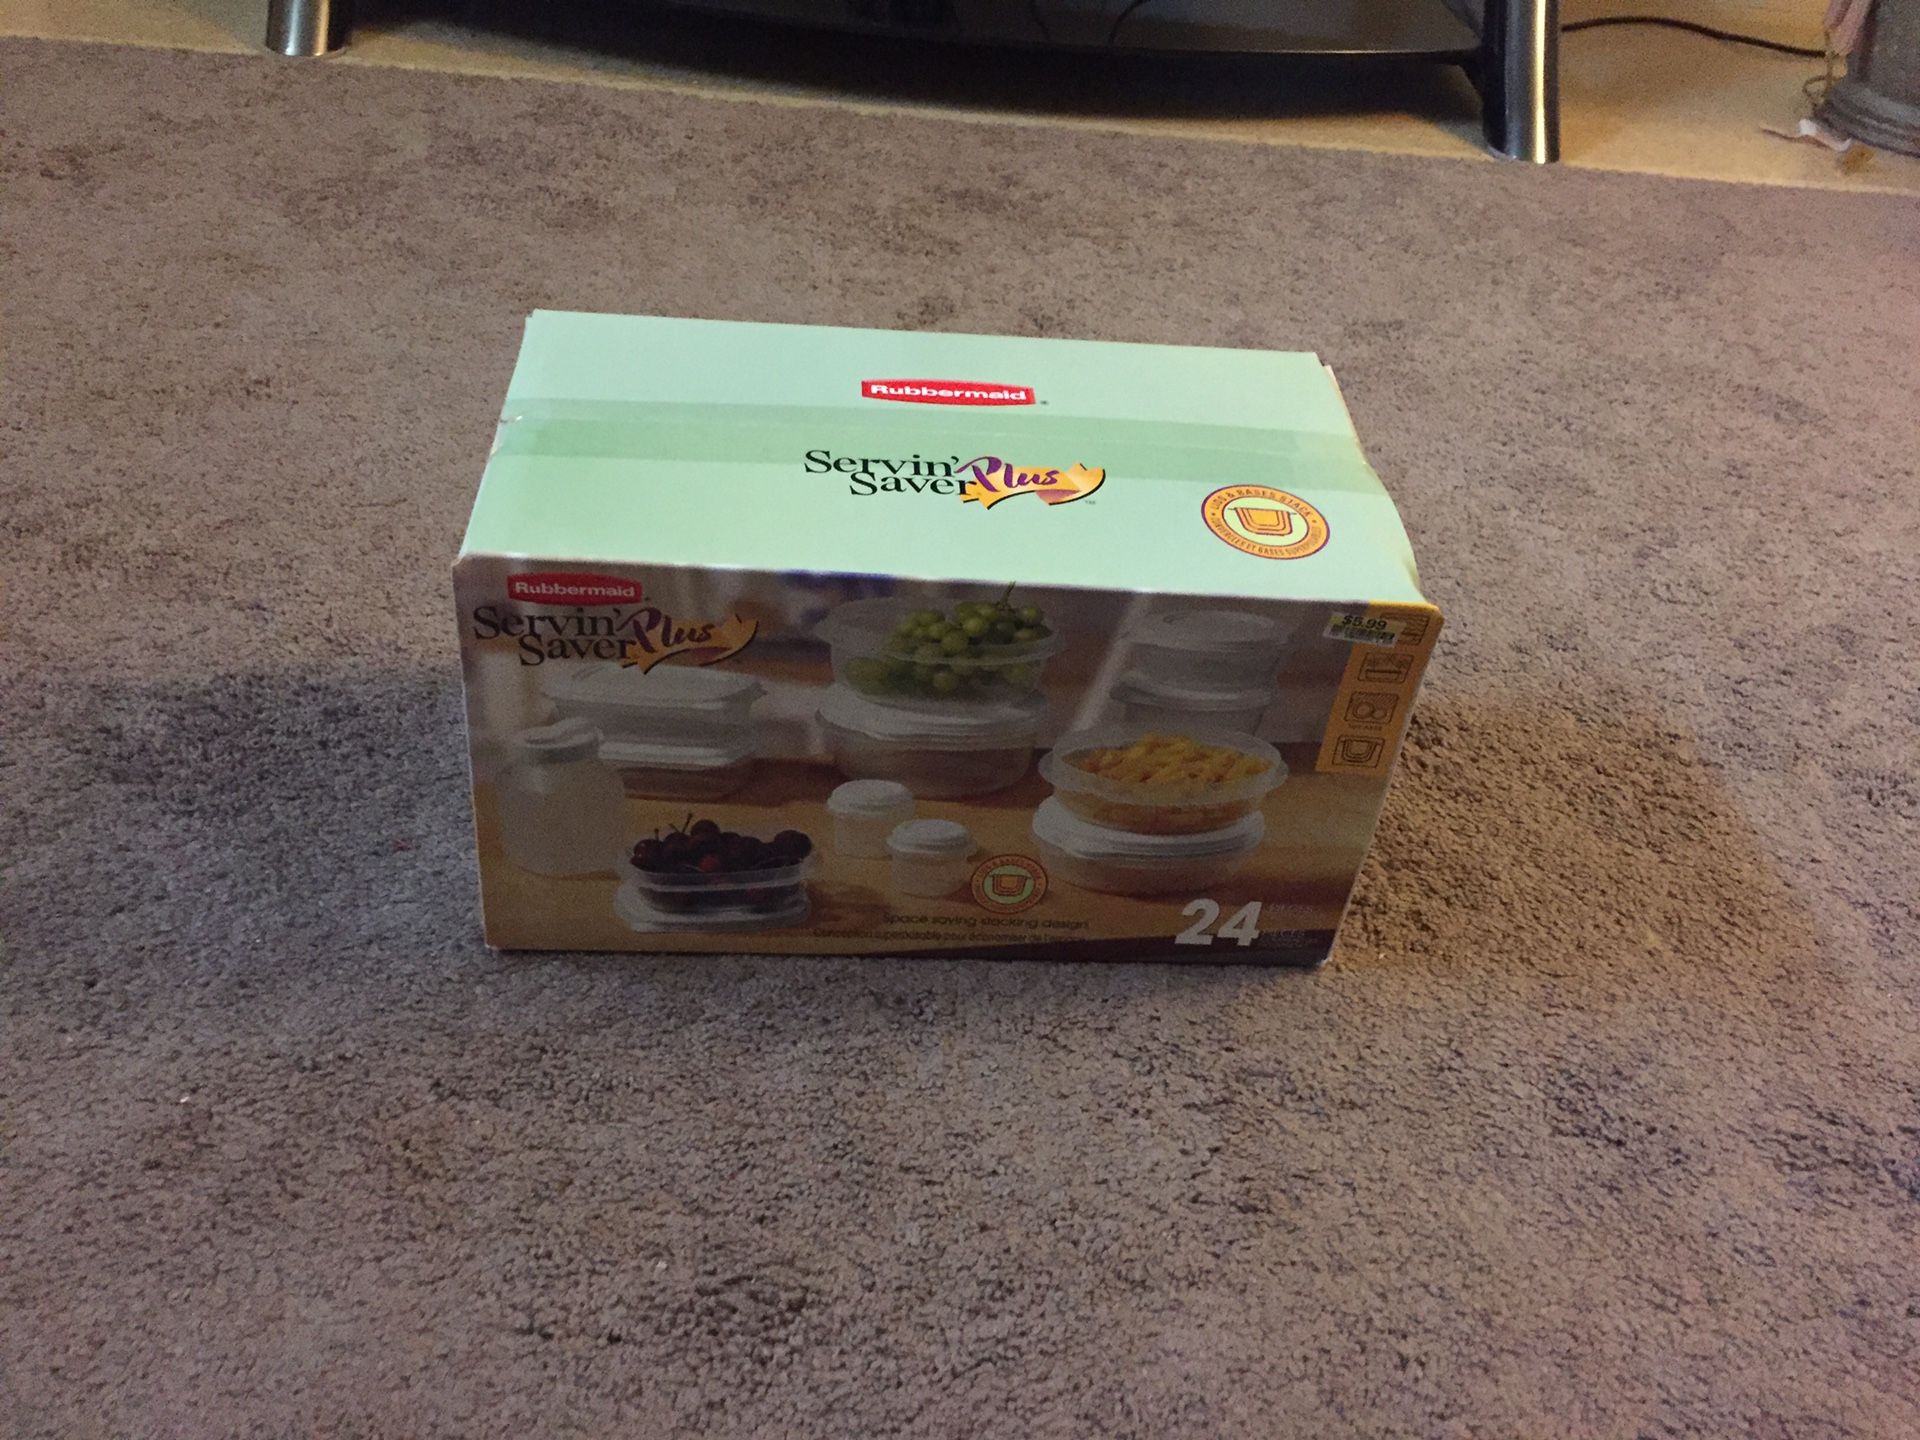 Brand new Rubbermaid 24 piece plastic storage containers and lids. Never used. Asking $2